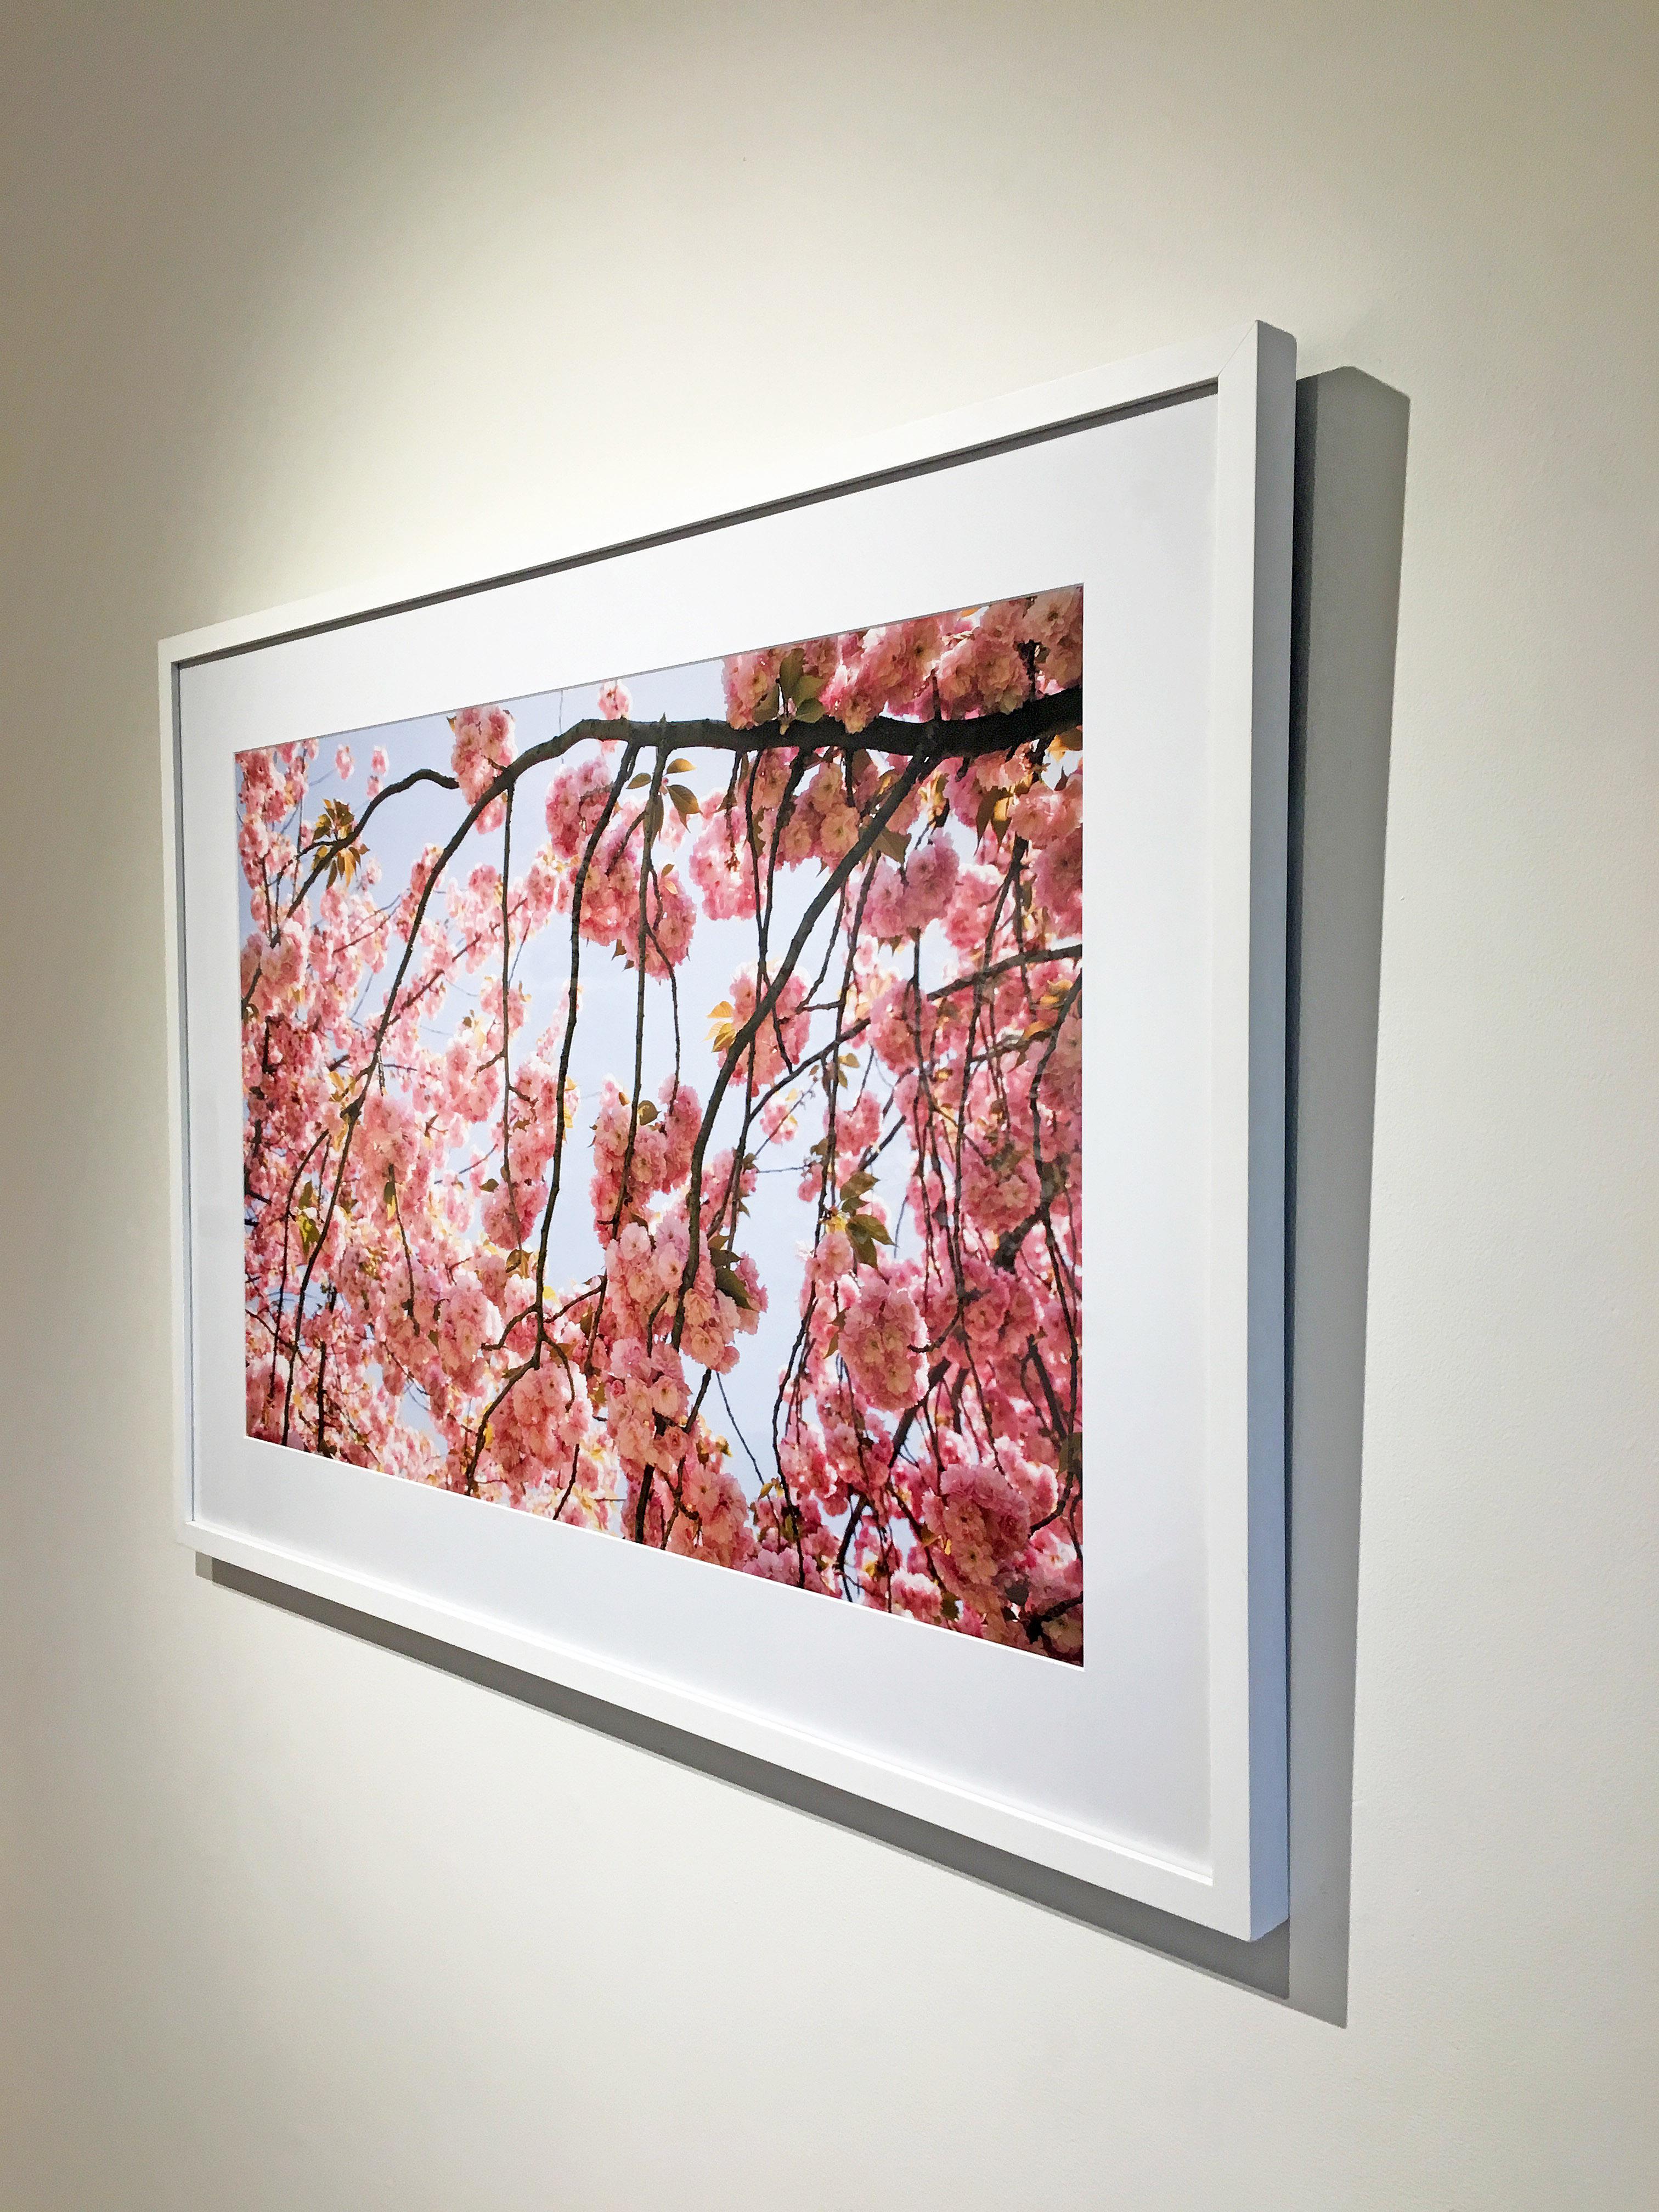 'Cherry Blossom 2' 2002 by Susan Wides. Chromogenic print, 20 x 30 in. / 27 x 37 in. (frame). This 2002 color photo features a close up view of several cherry tree branches and its flowering blooms.  In a white frame.

NY photographer, Susan Wides,